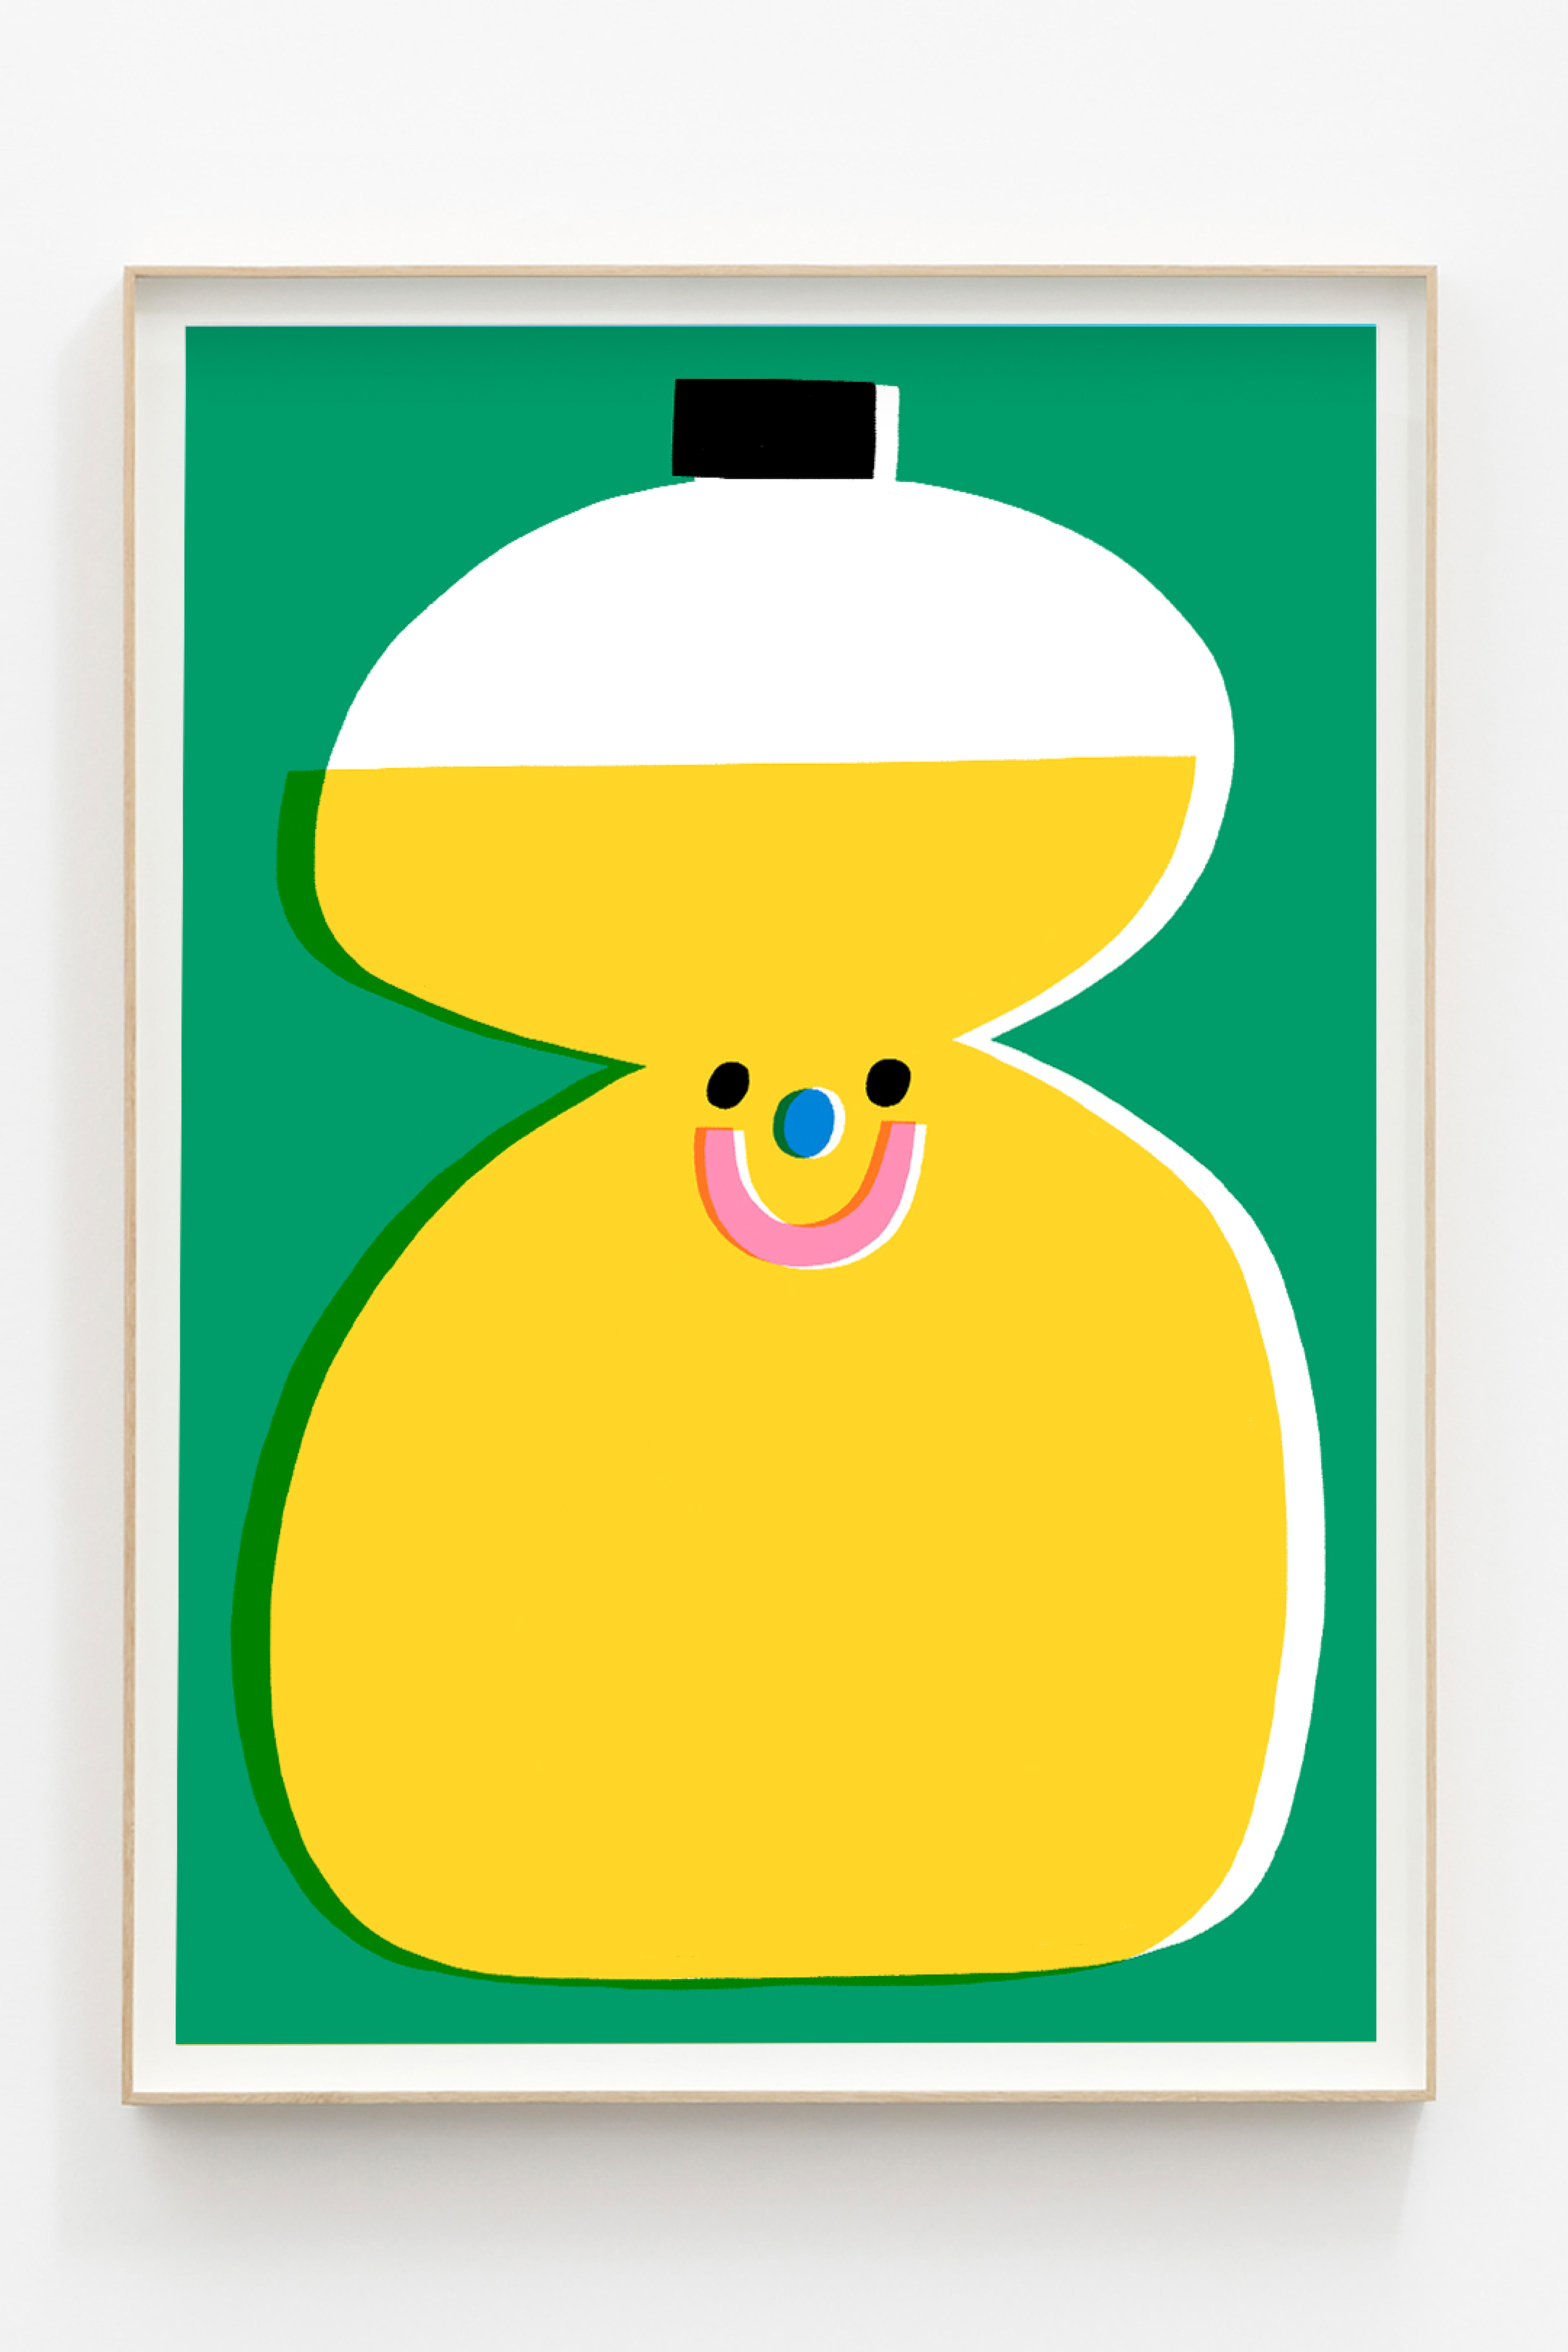 Illustration of a yellow smiling bottle on a green background.